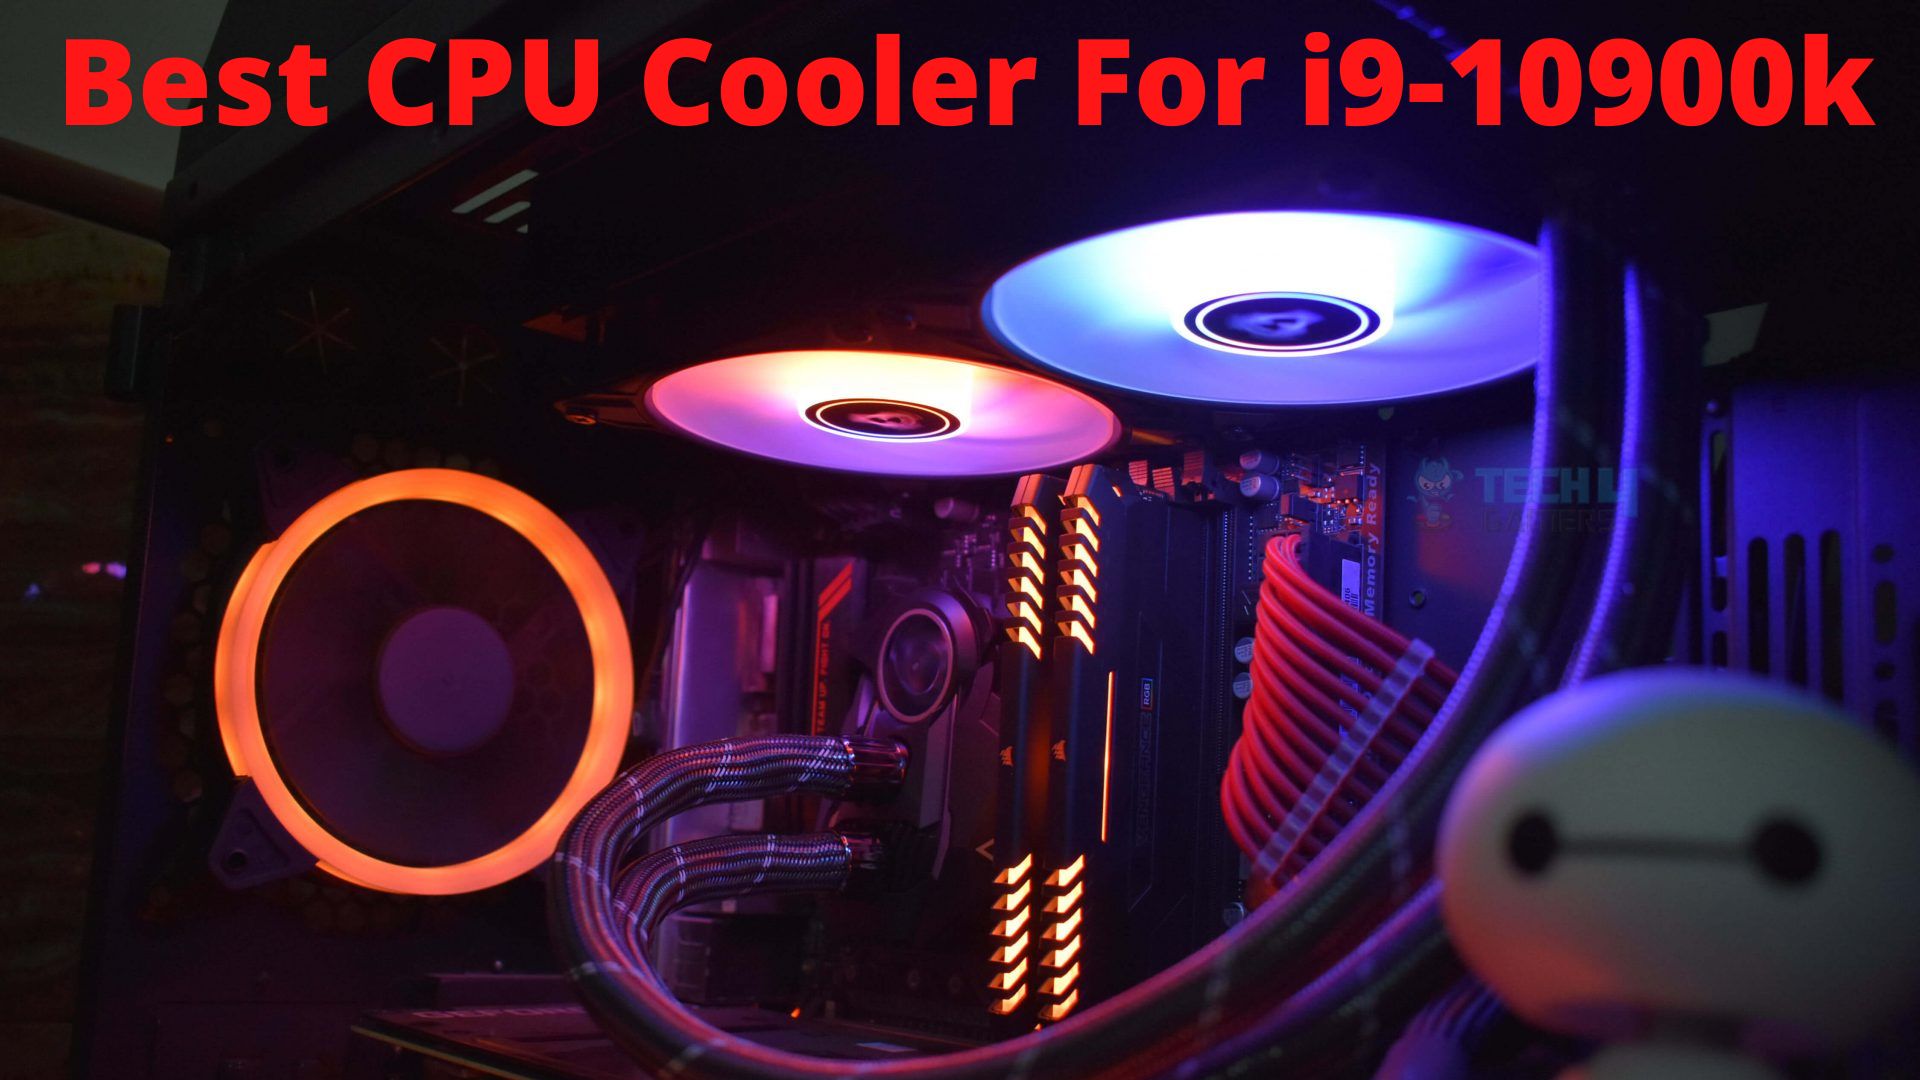 The BEST CPU Coolers For i9-10900k In 2022 - Tech4Gamers